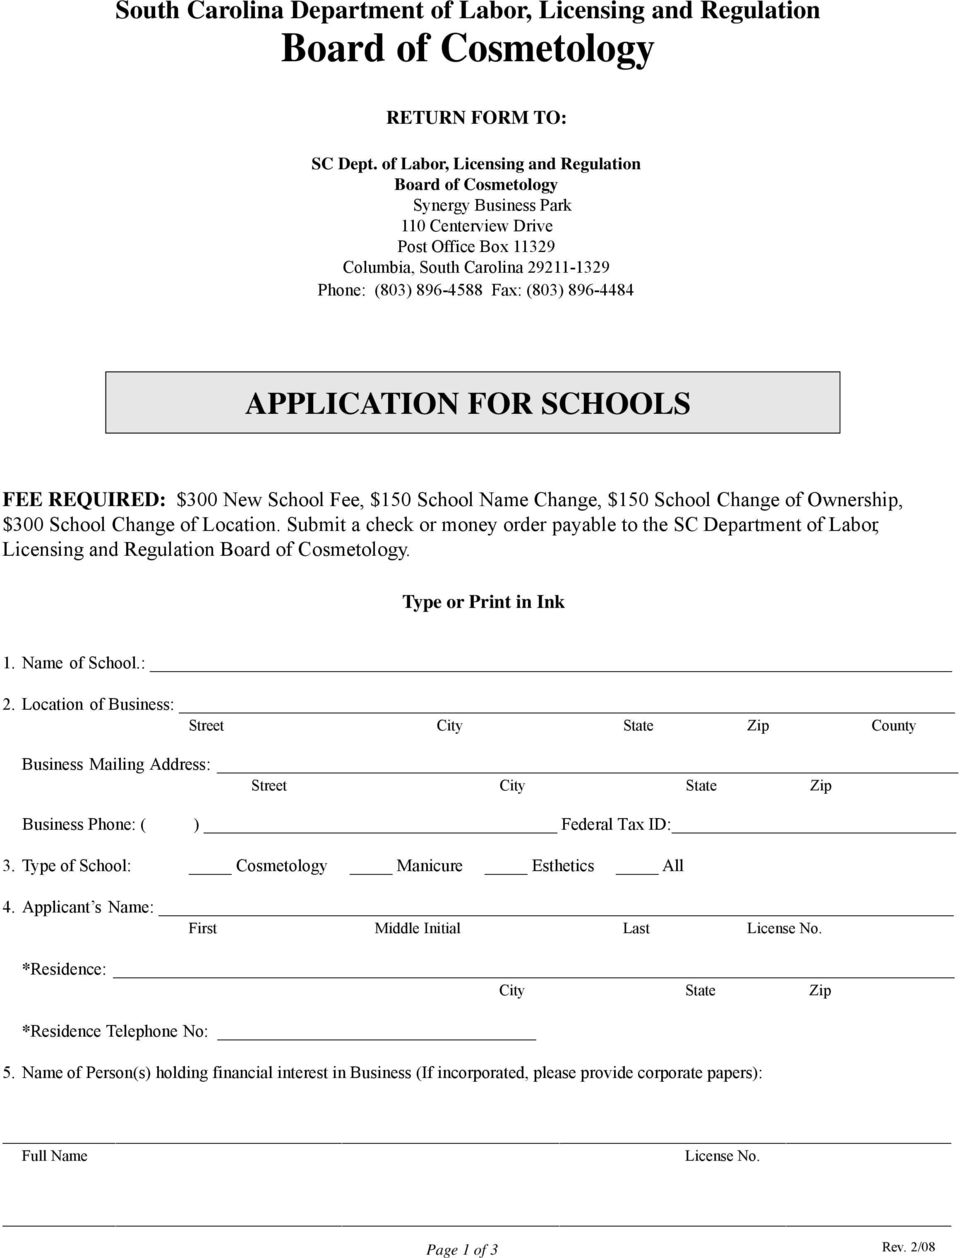 APPLICATION FOR SCHOOLS FEE REQUIRED: $300 New School Fee, $150 School Name Change, $150 School Change of Ownership, $300 School Change of Location.